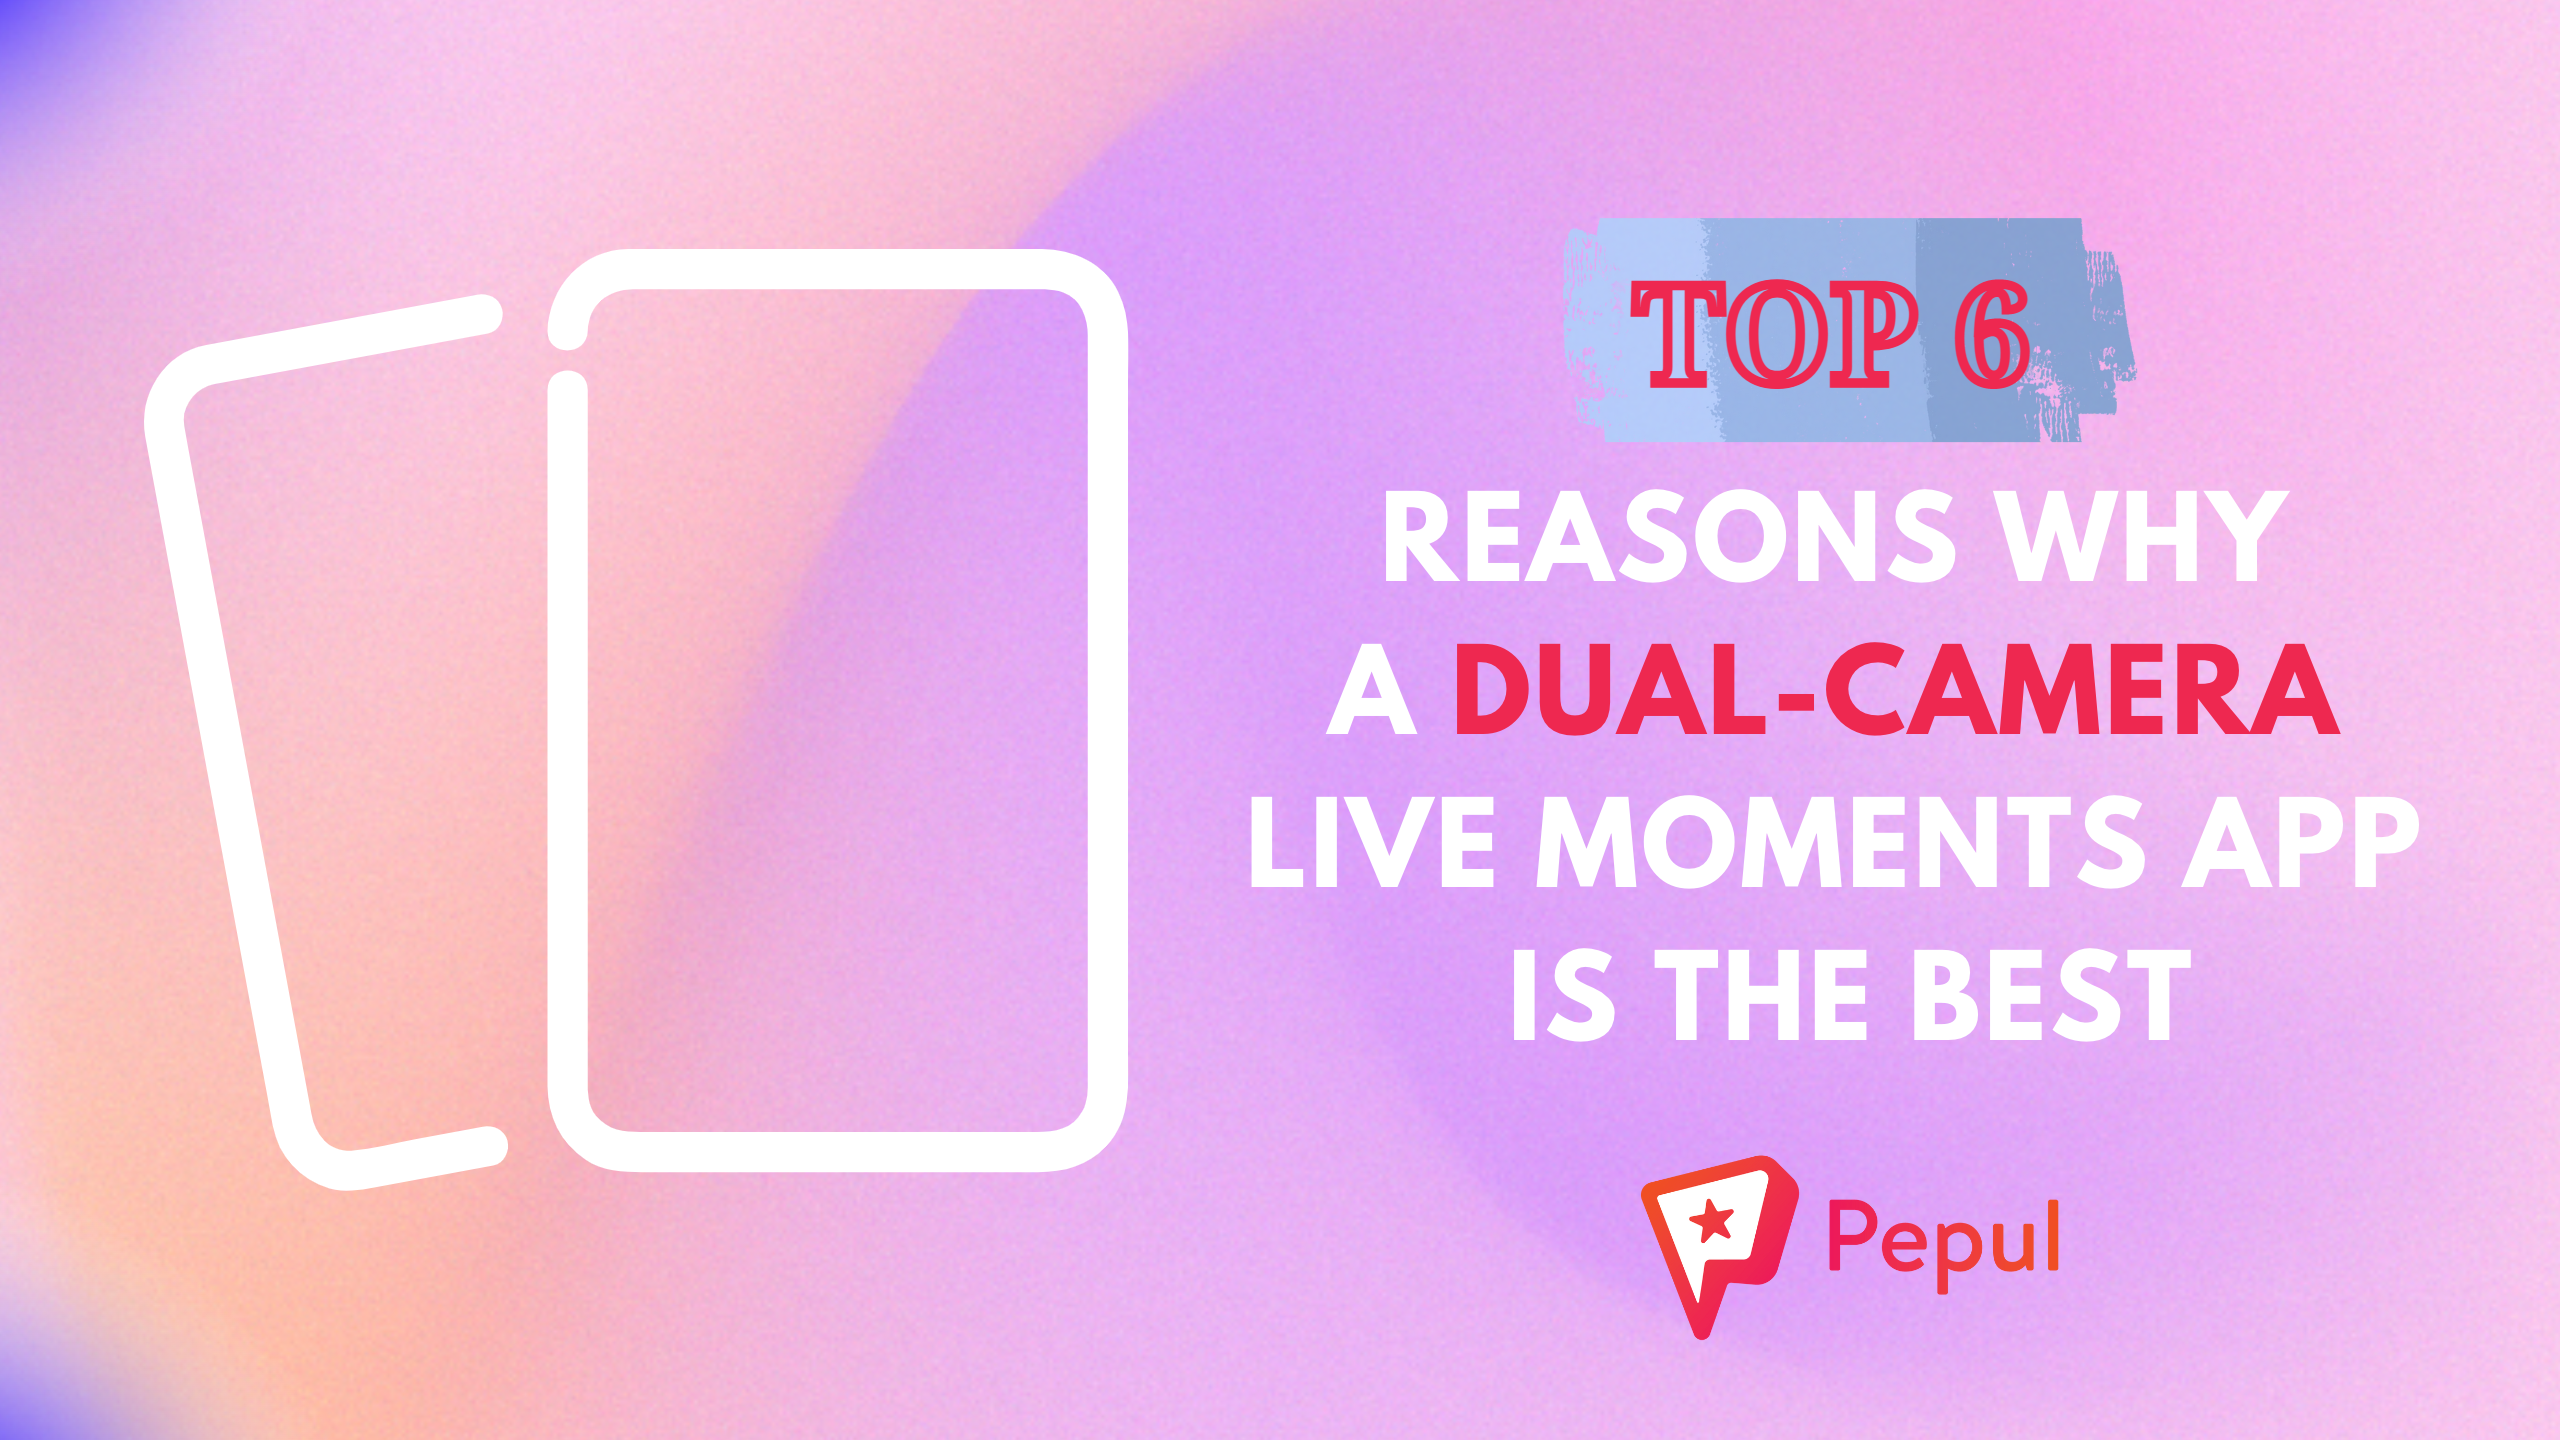 Top 6 Reasons why a Dual Camera Live Moments app is the best